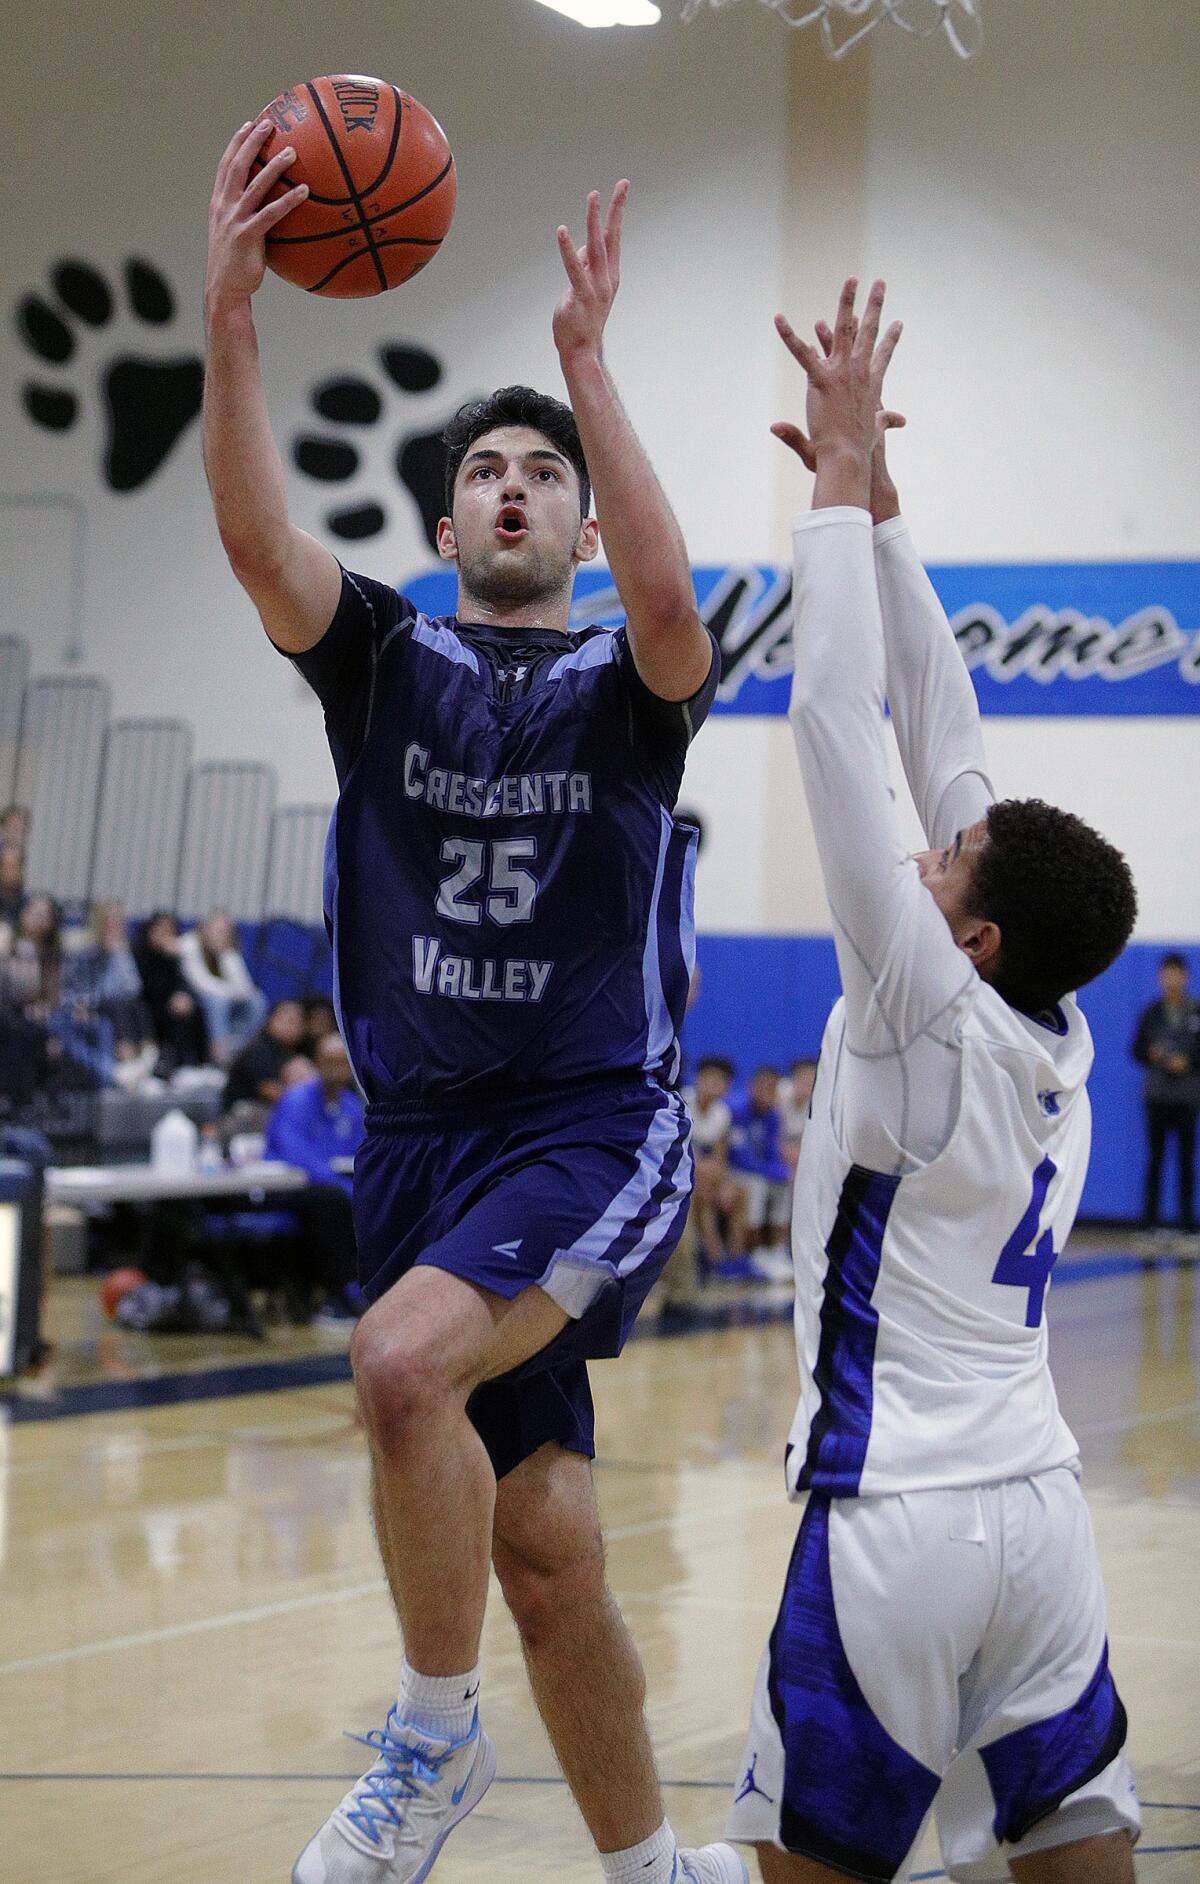 Crescenta Valley's Danny Khani drives against Burbank's Phoenix Mosley in a Pacific League boys' basketball game at Burbank High School on Thursday.